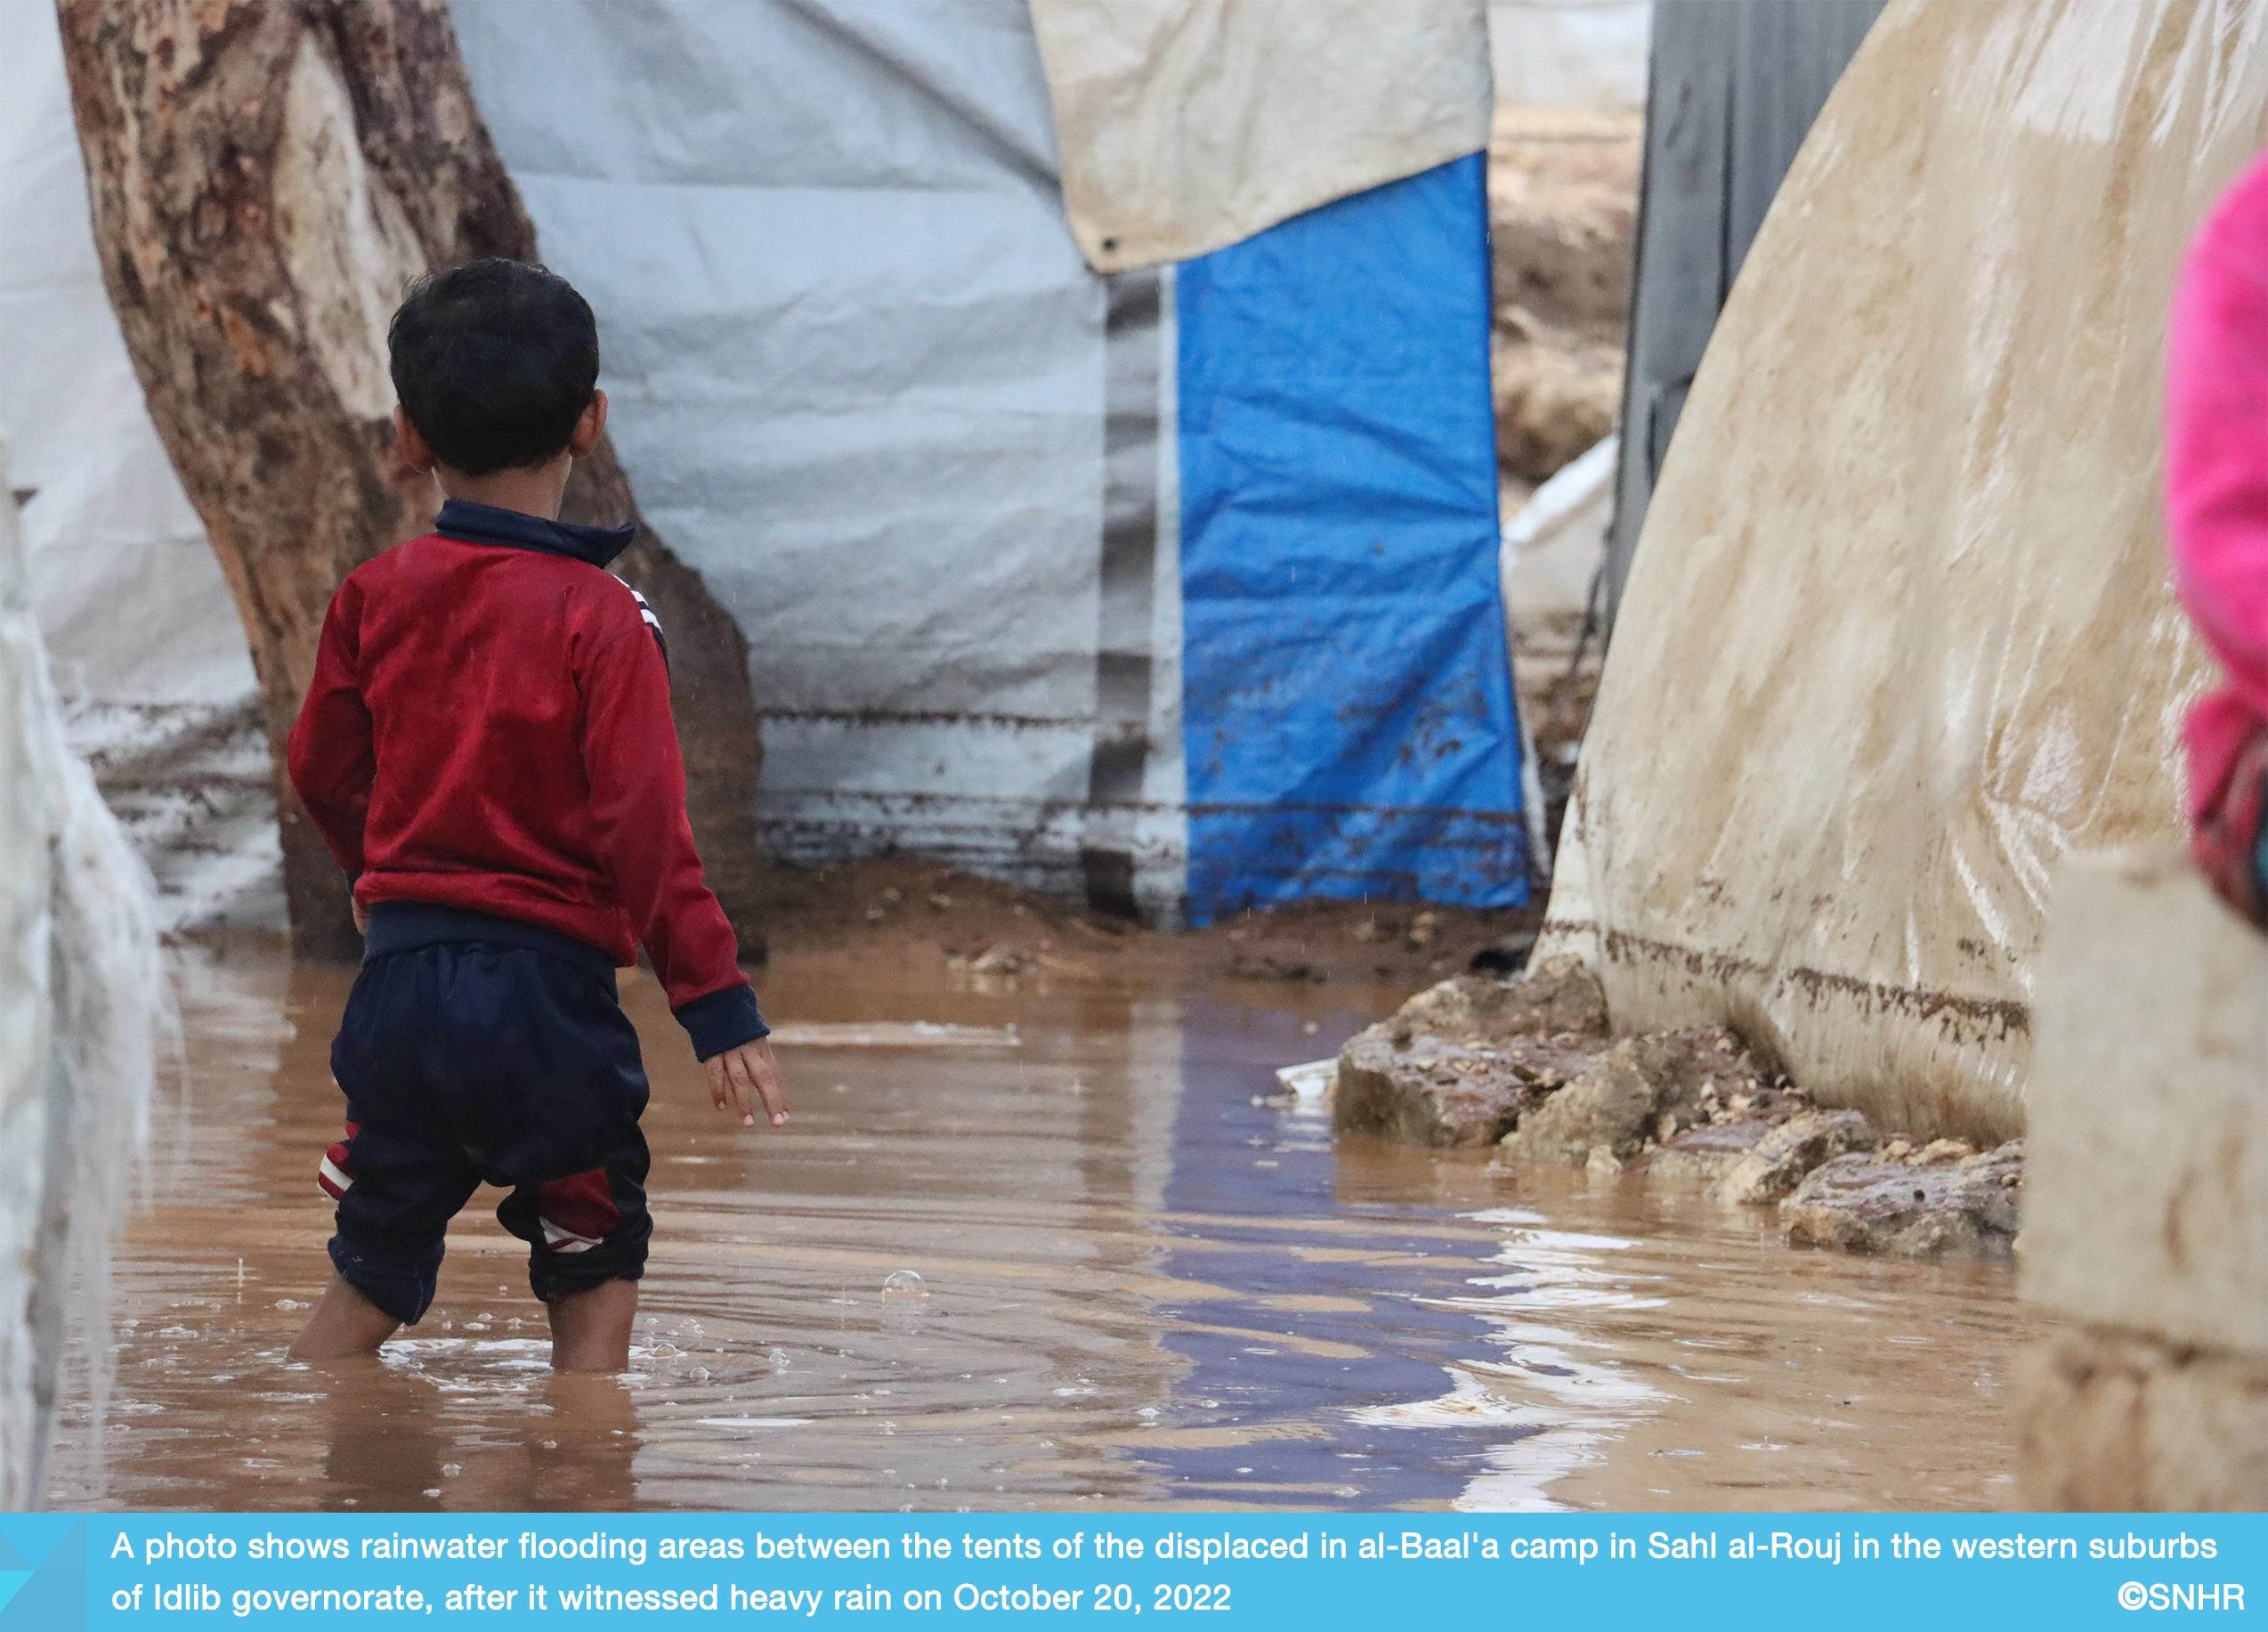 Heavy rains caused damage in camps for the displaced in the suburbs of Idlib on October 20, 2022